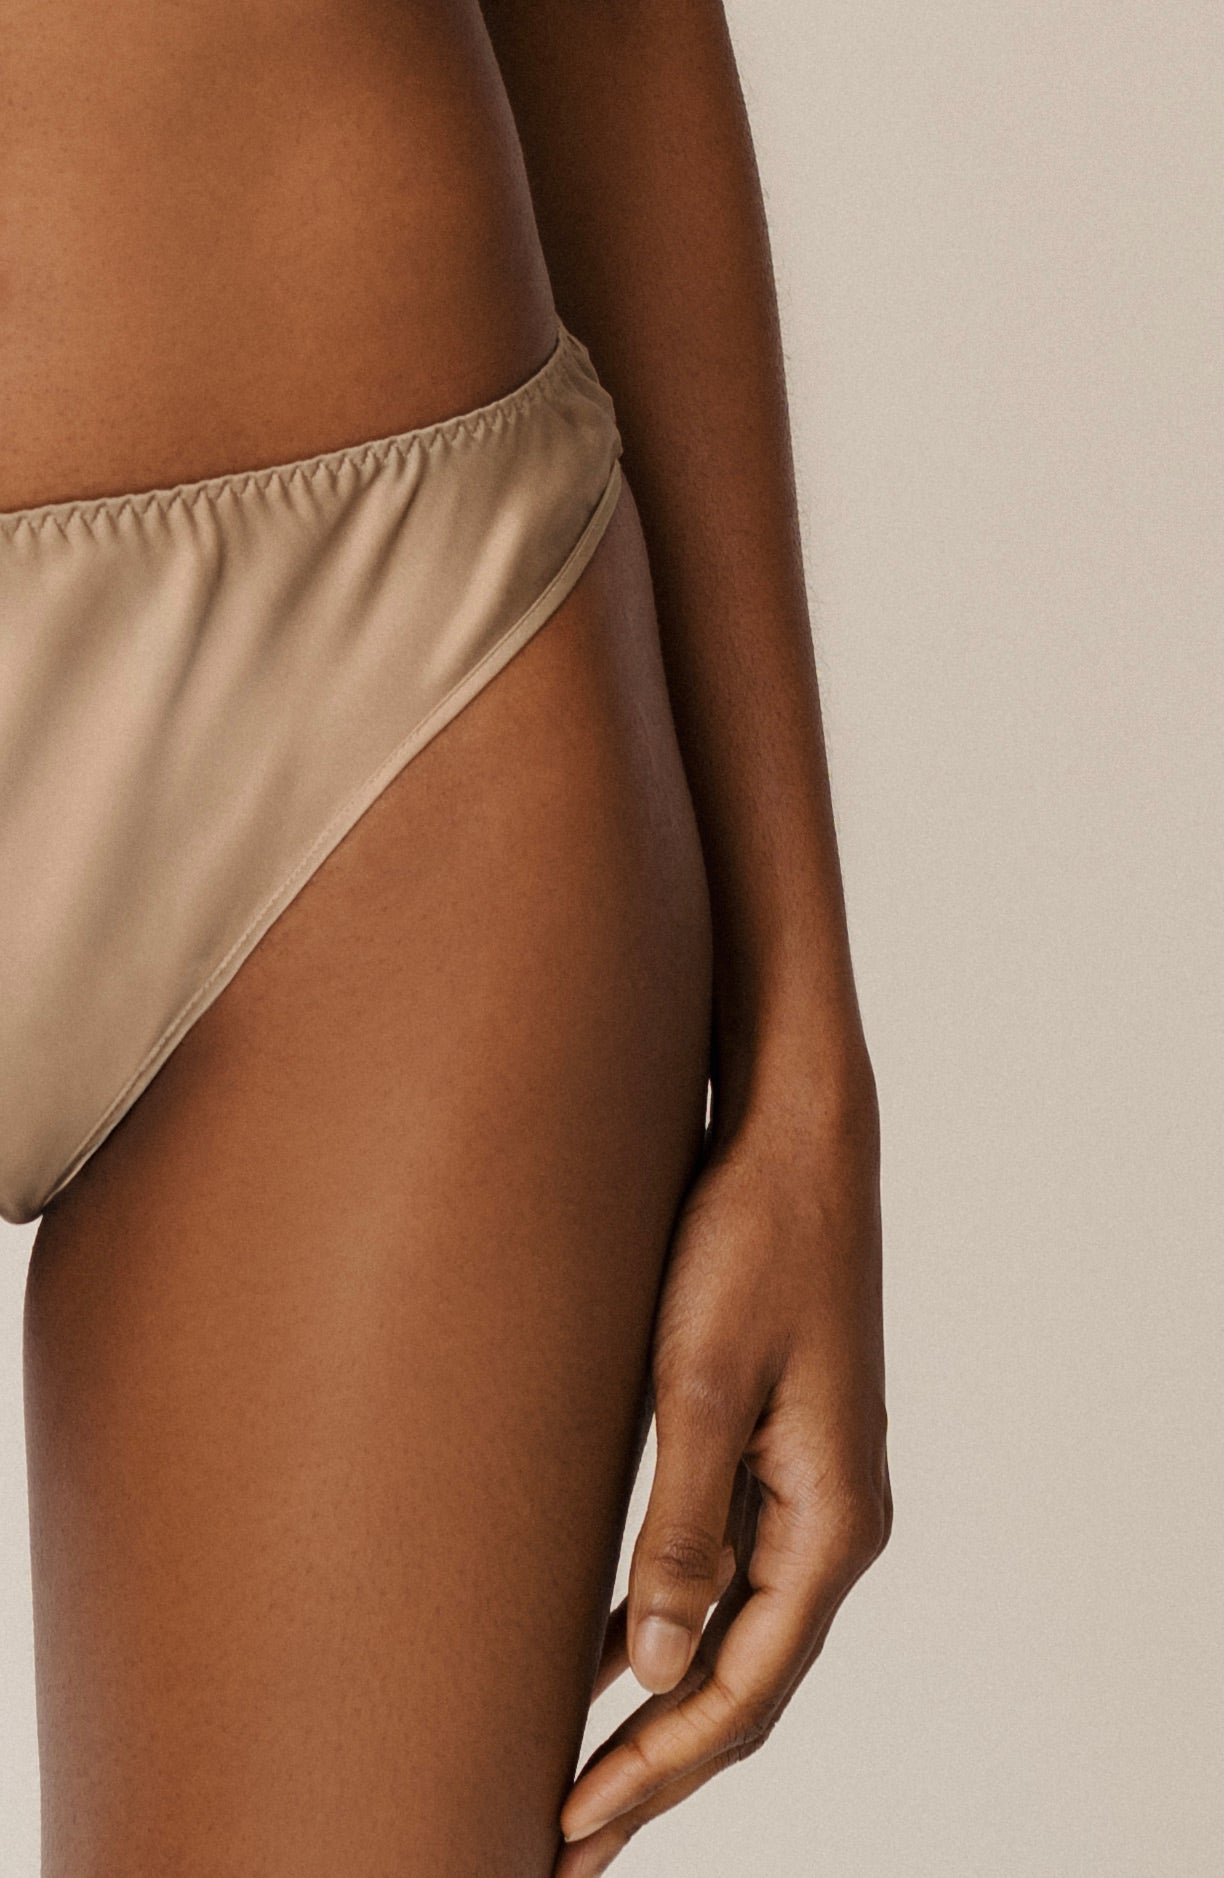 Shop THEA: HIGH-WAISTED PANTIES IN GOTS ORGANIC SILK from HERTH at Seezona